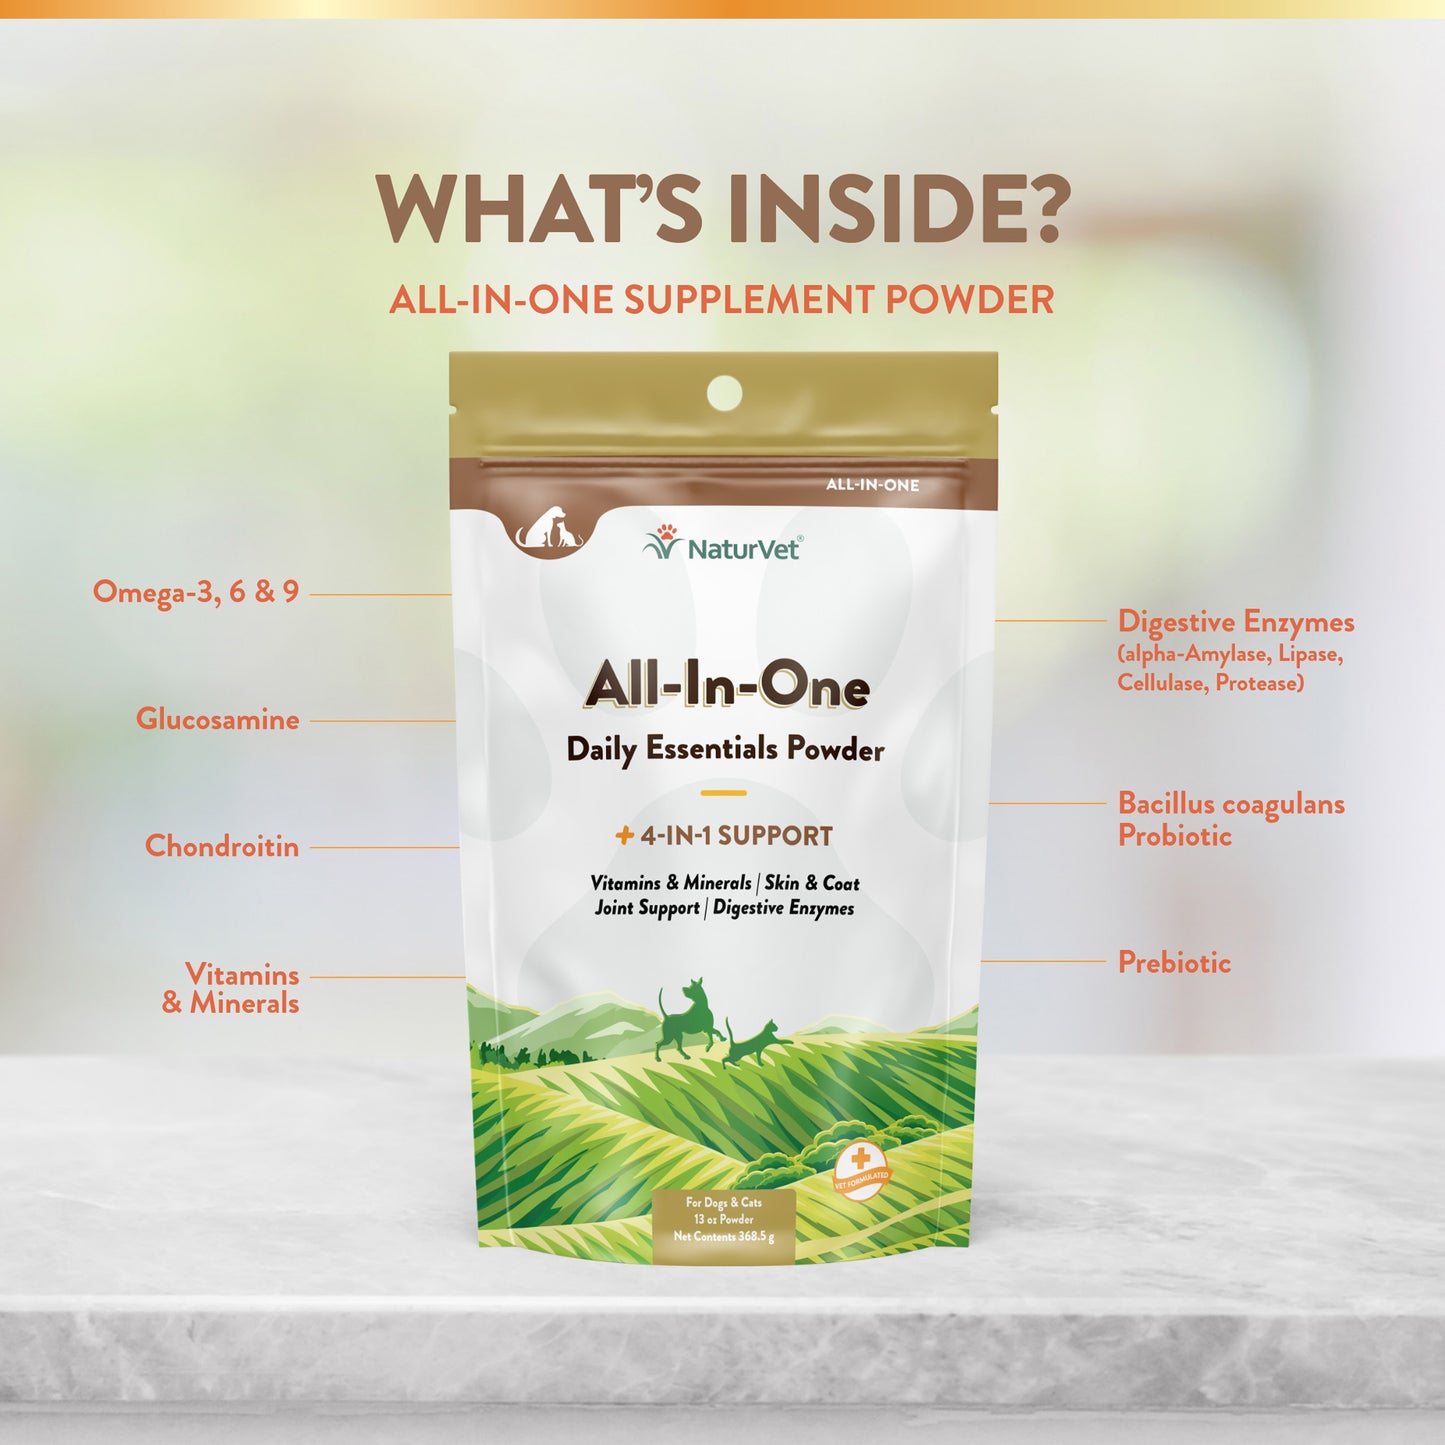 All-In-One Supplement Powder